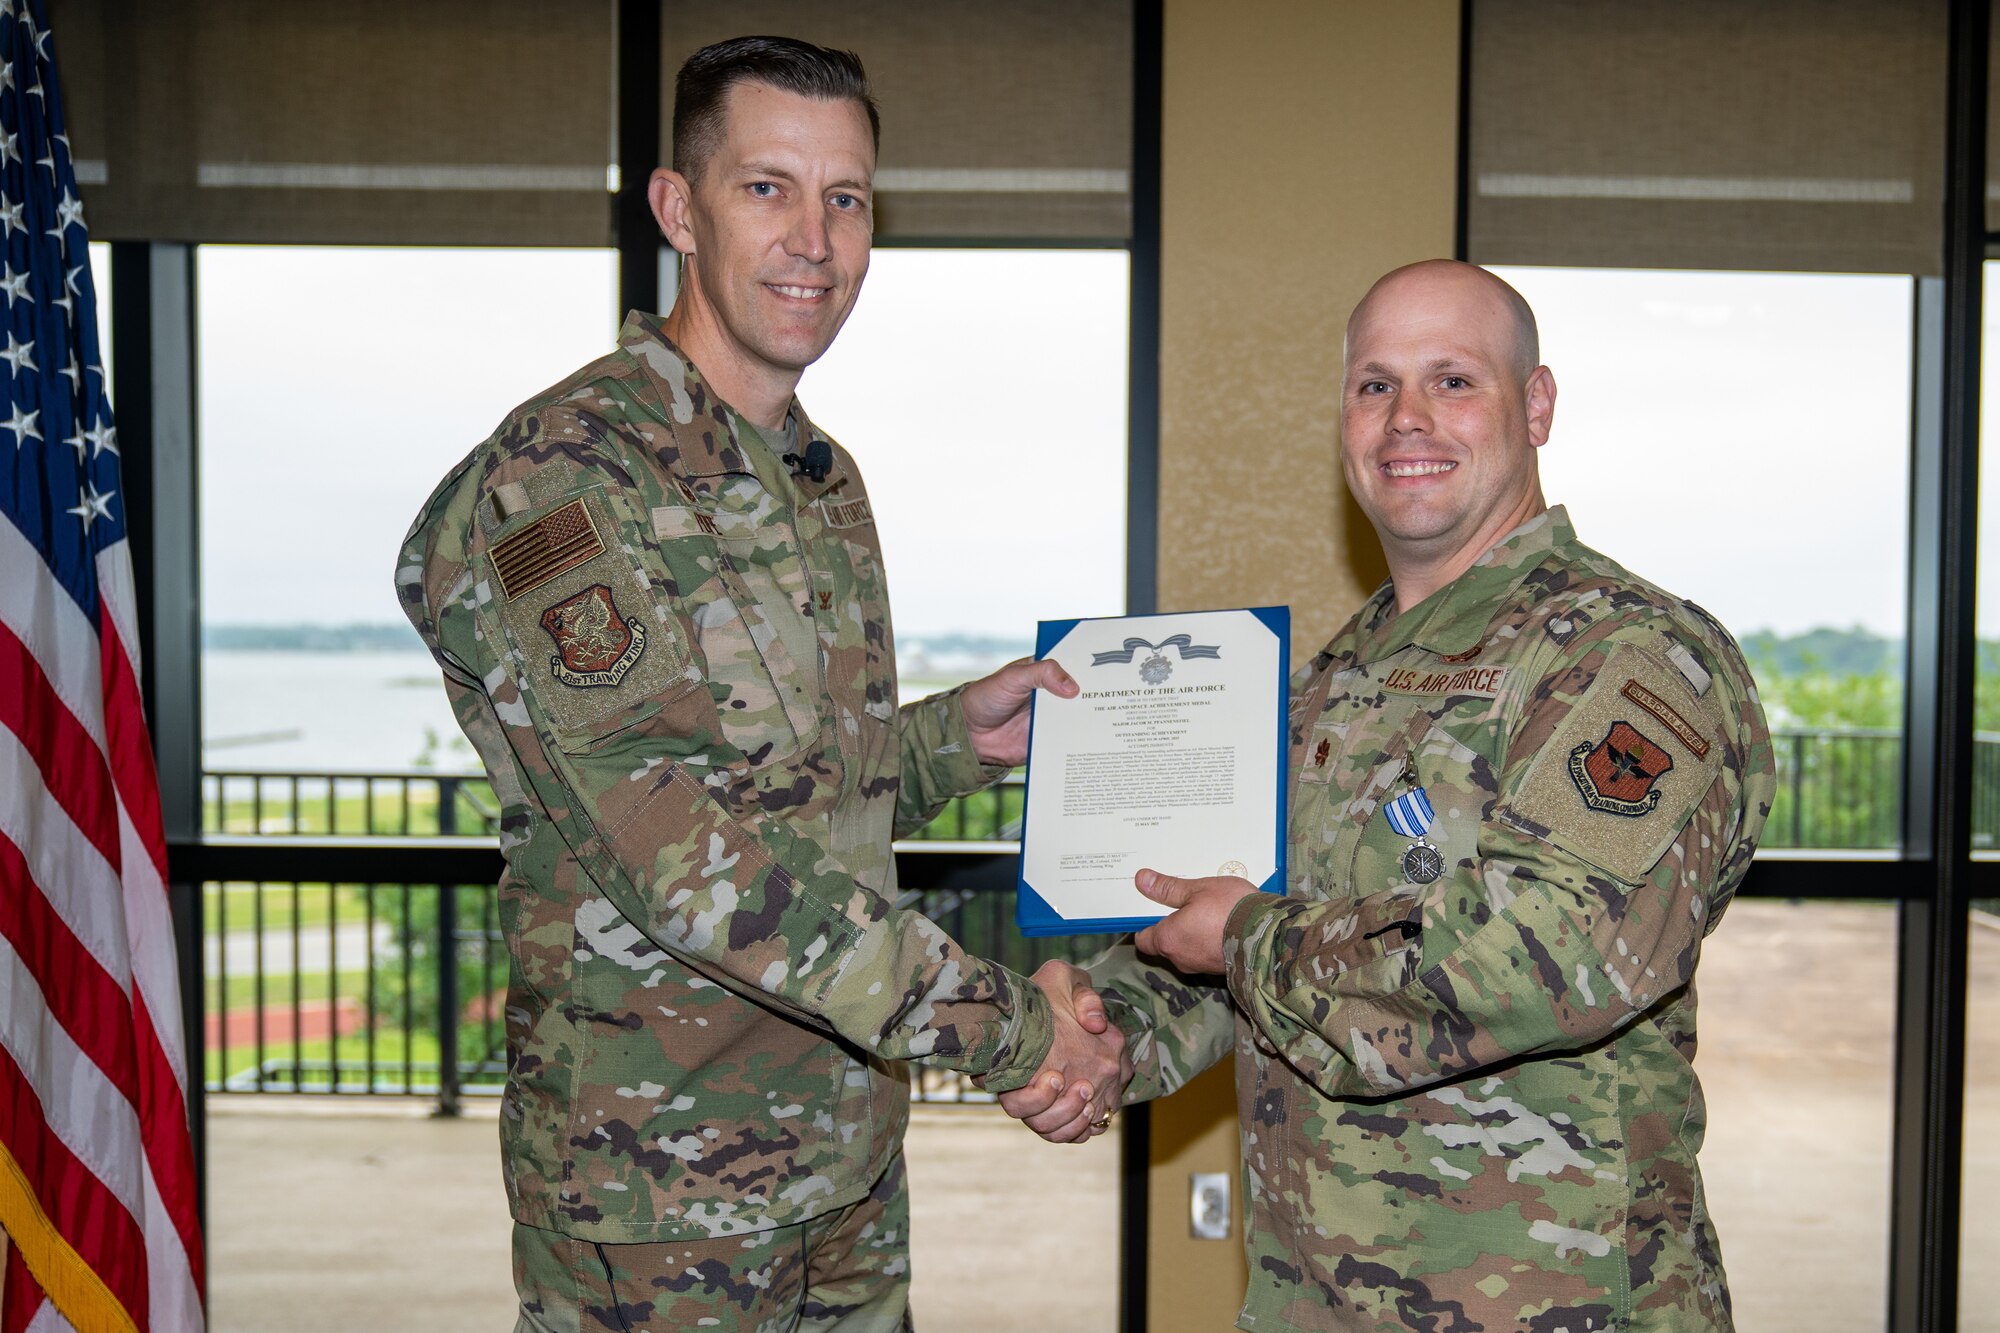 U.S. Air Force Col. Billy Pope, Jr., 81st Training Wing commander, awards Maj. Jake Pfannenstiel, 81st Force Support Squadron operations officer, the Air and Space Achievement medal at Keesler Air Force Base, Mississippi, May 24, 2023.